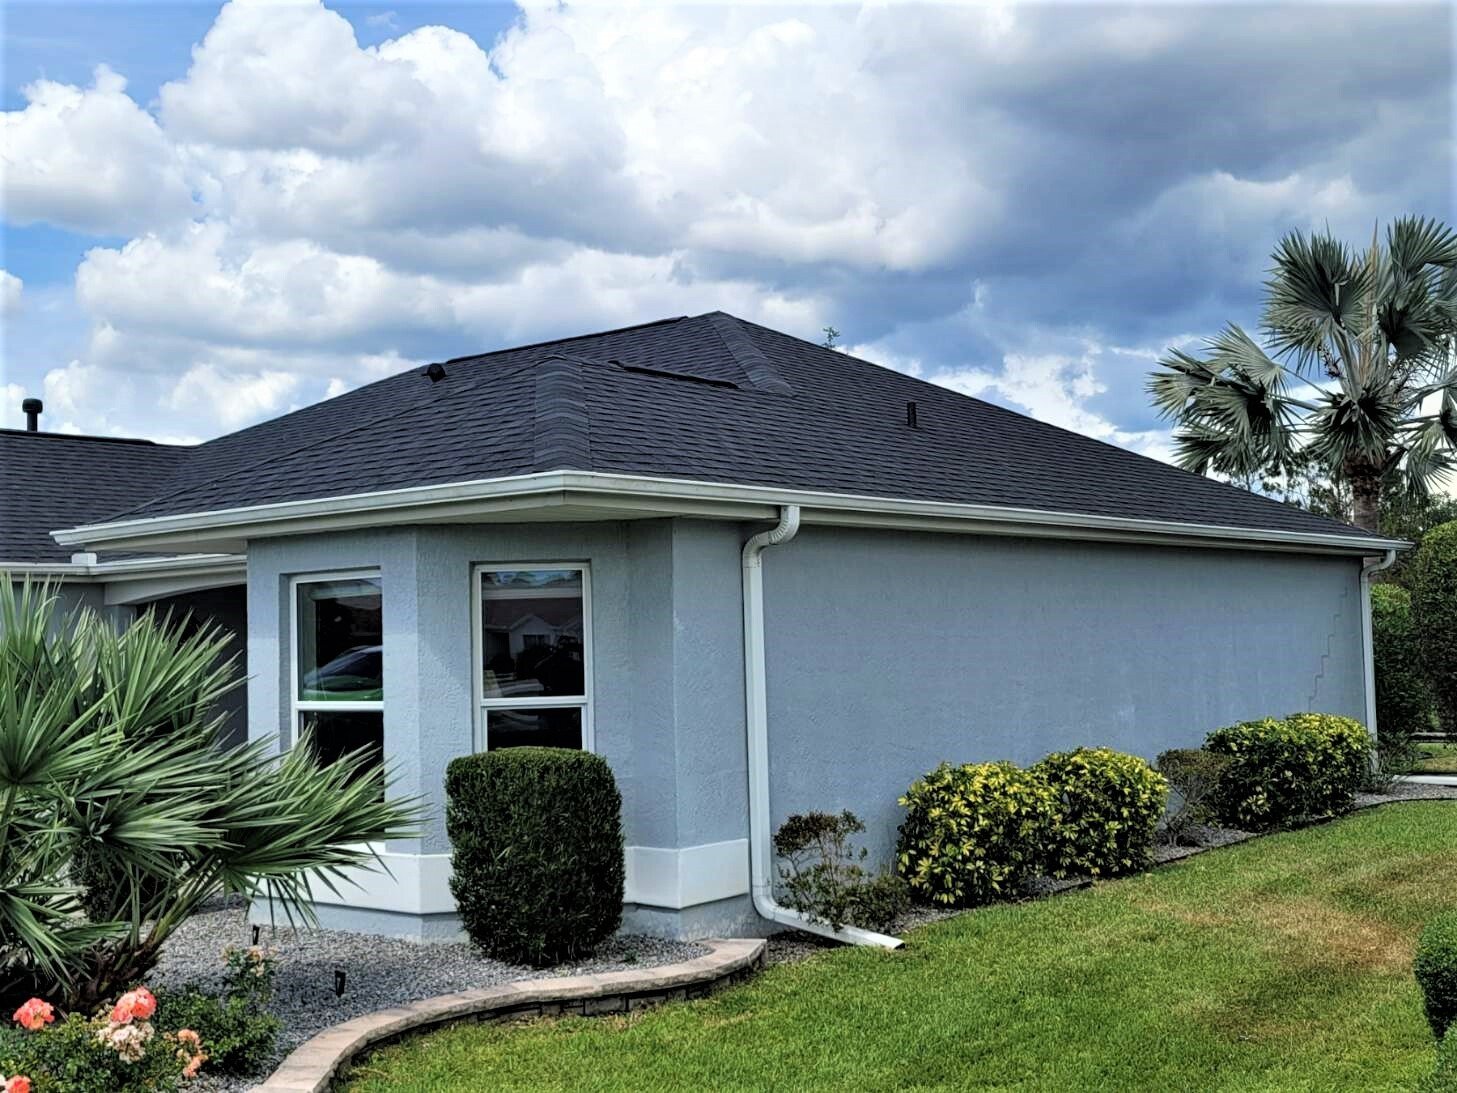 APC Roofing in Clermont, FL - Roof Replacement